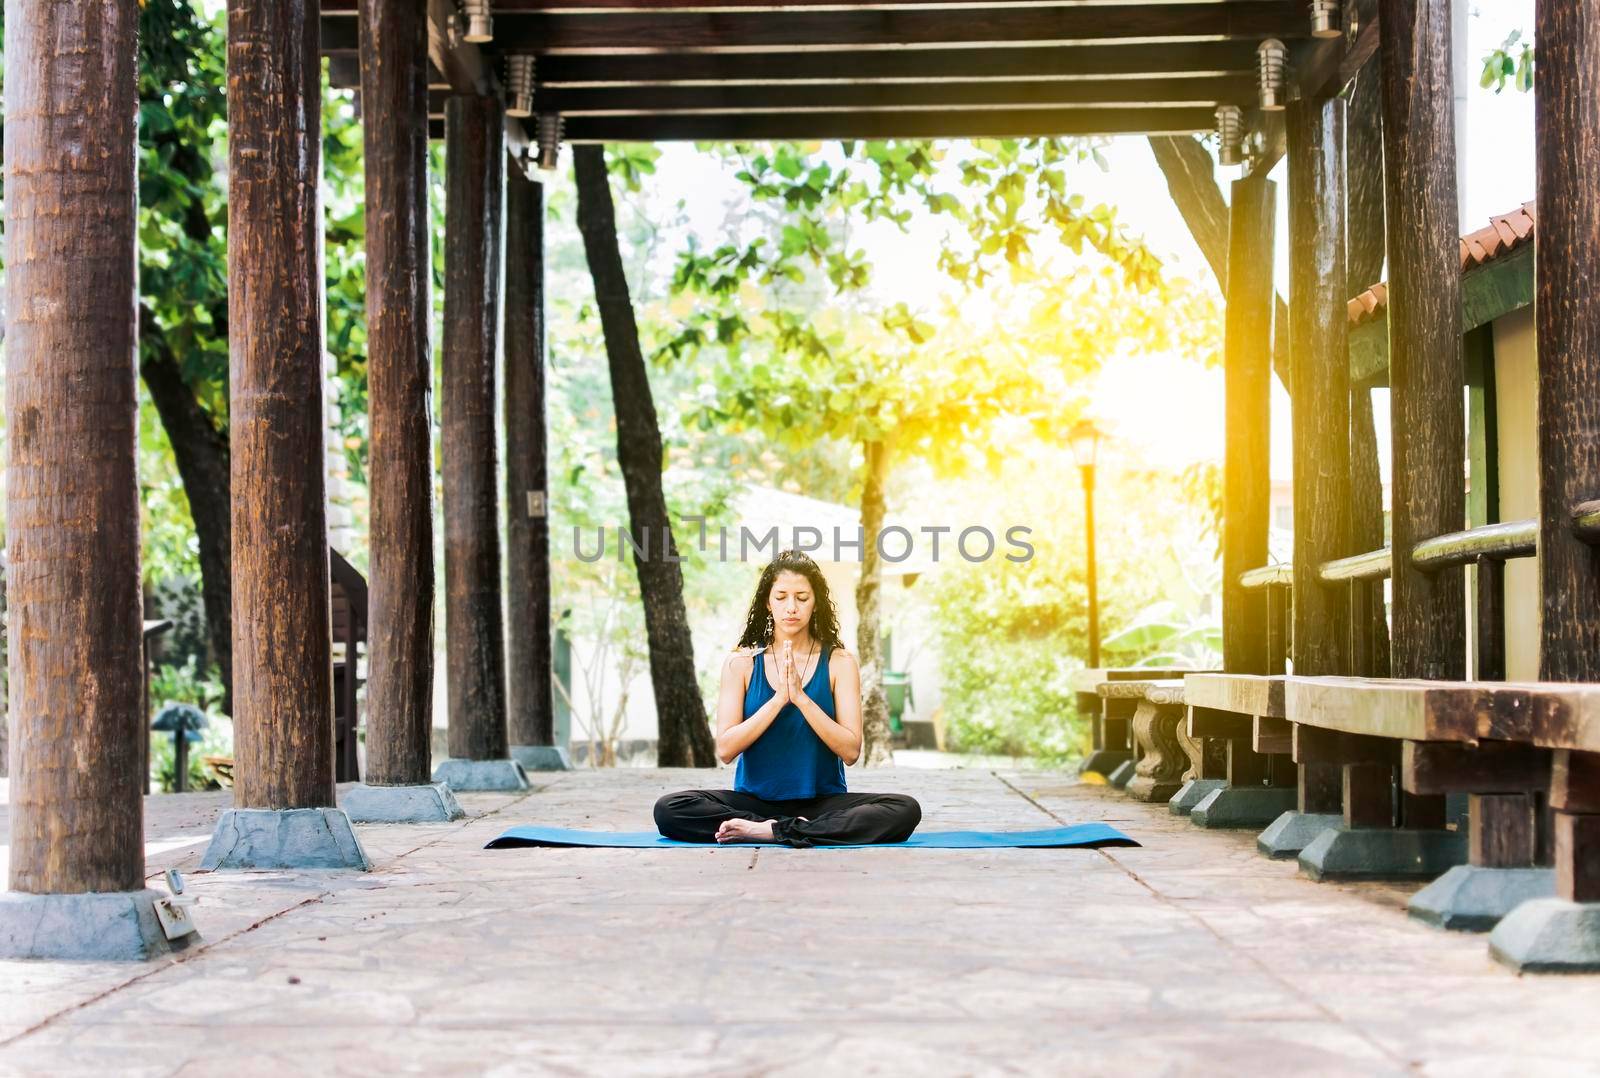 A girl sitting doing meditation yoga outdoors, Woman doing yoga outdoors, a young woman doing yoga with closed eyes. by isaiphoto